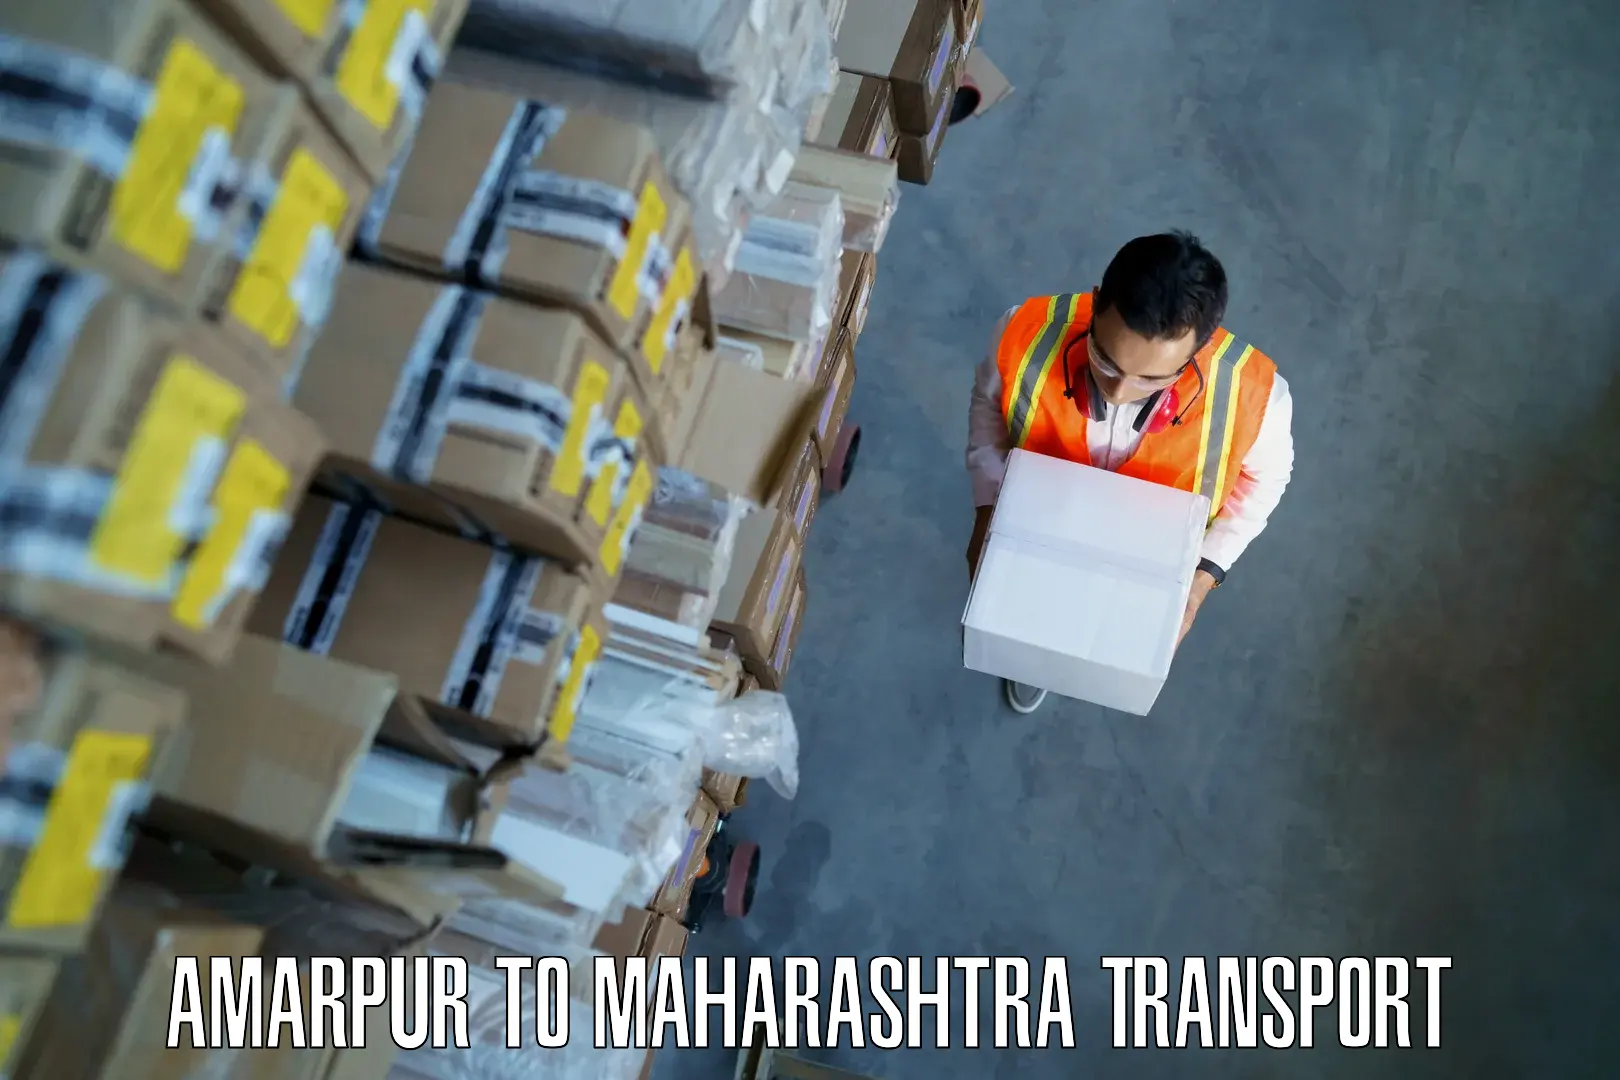 Truck transport companies in India Amarpur to Institute of Chemical Technology Mumbai